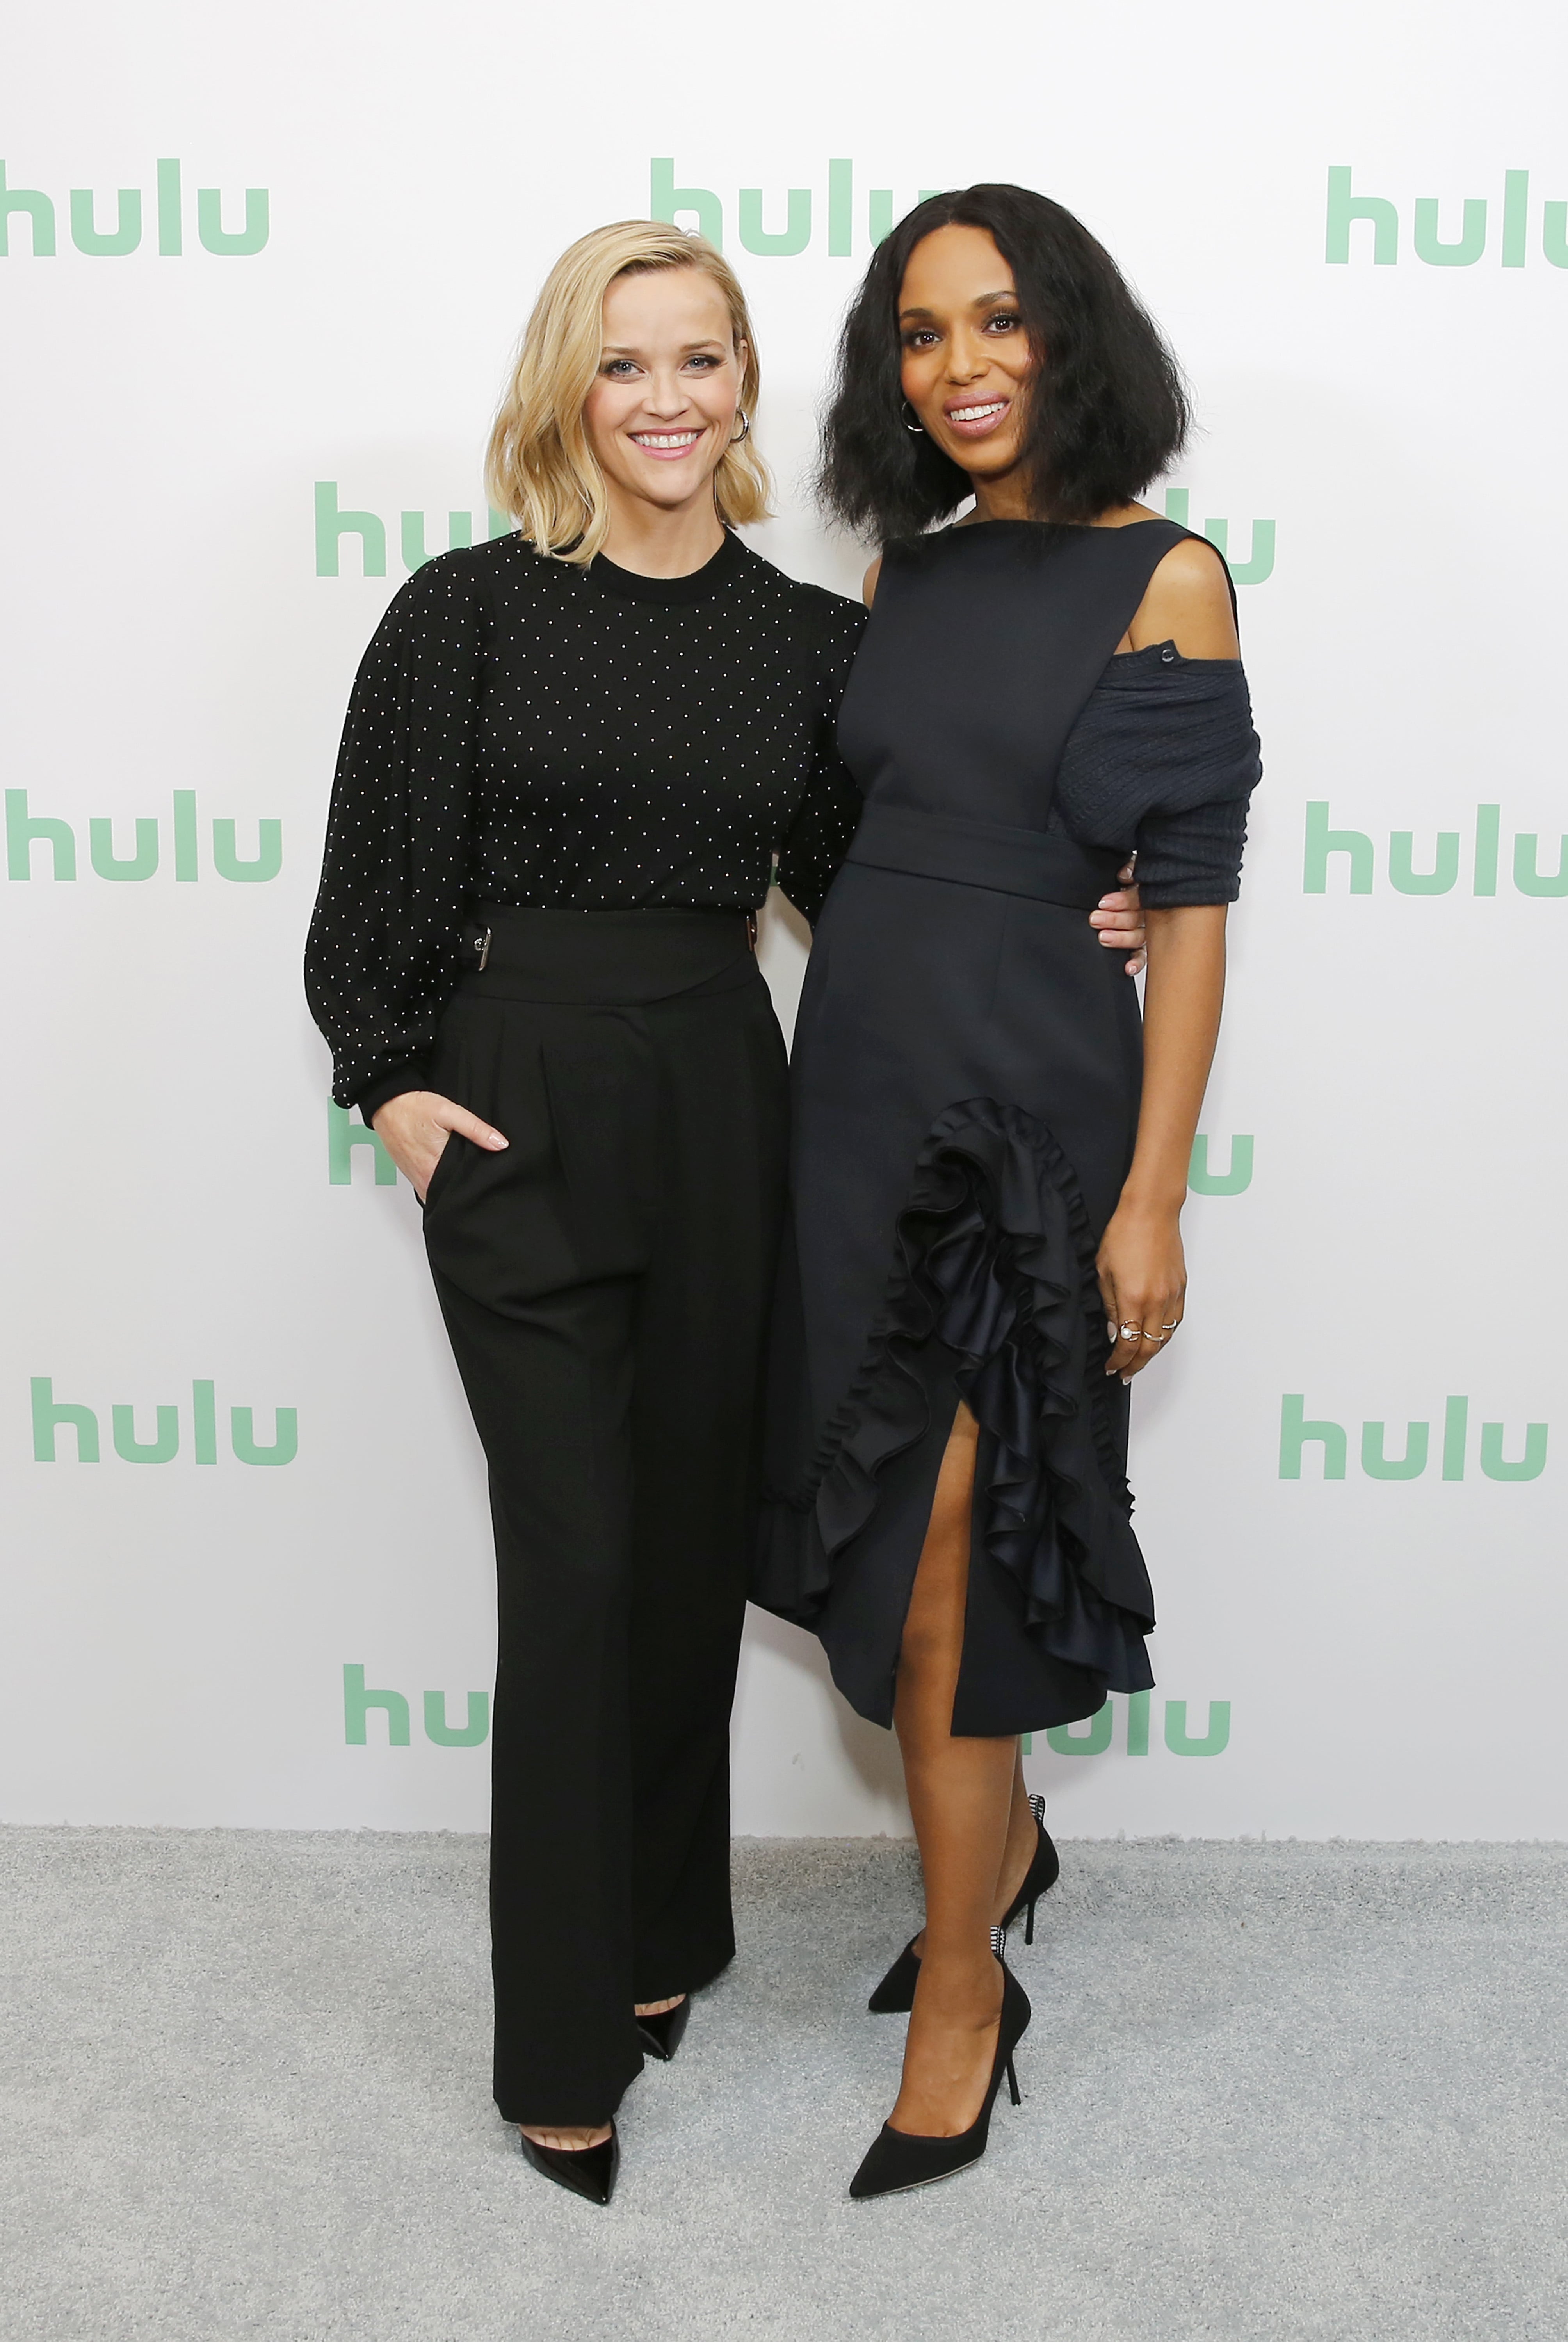 Reese Witherspoon and Kerry Washington's Friendship Pictures